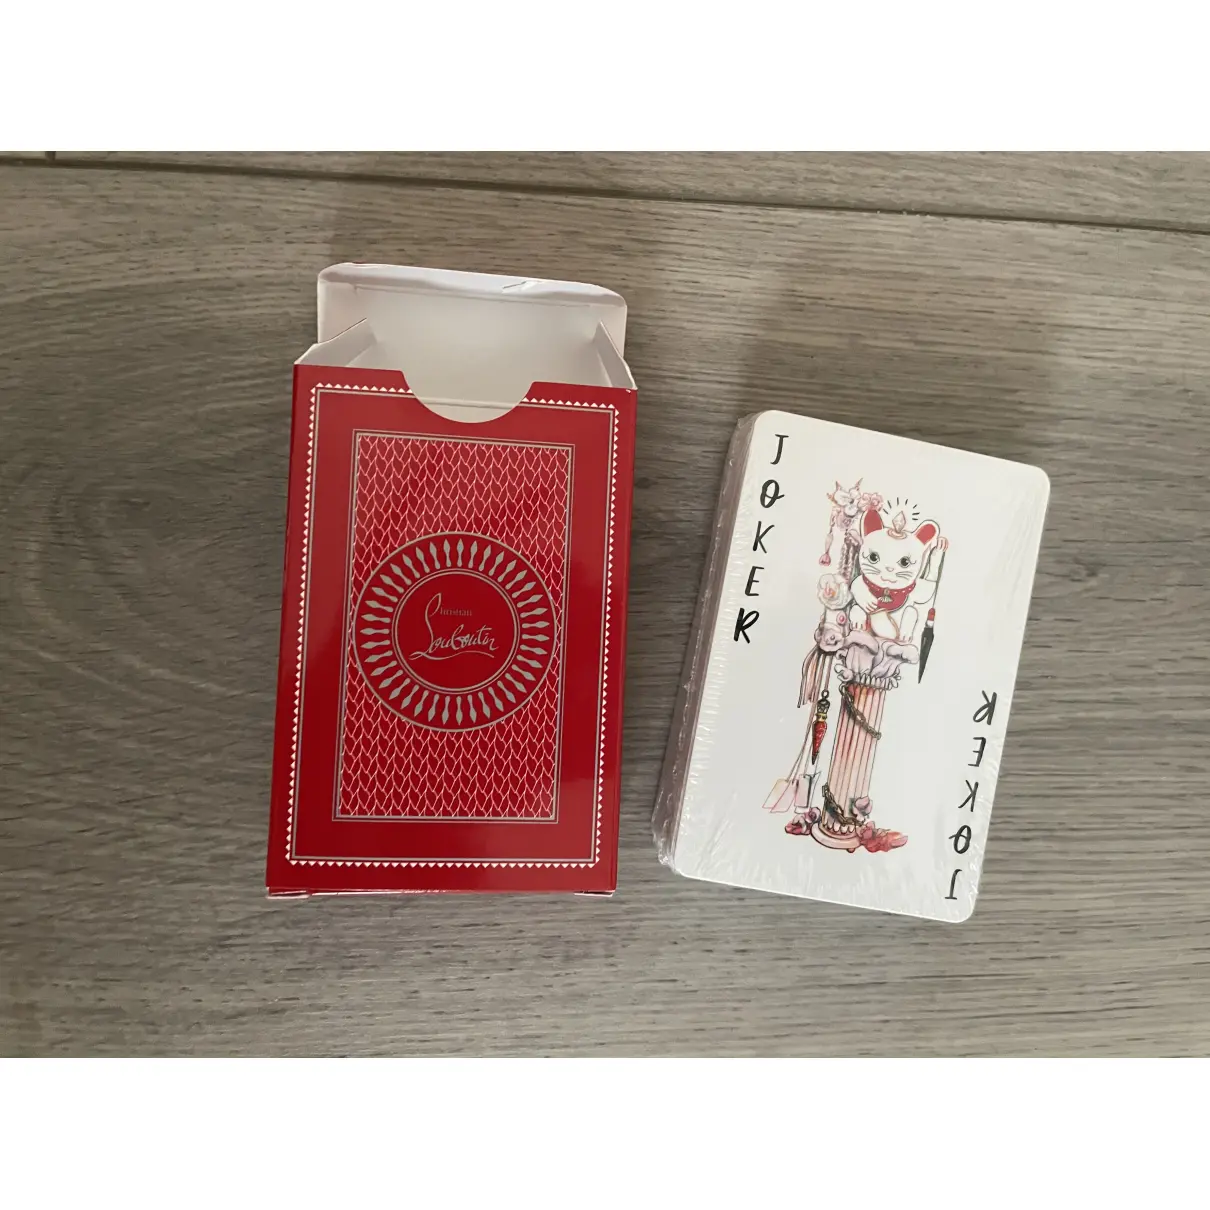 Buy Christian Louboutin Card game online